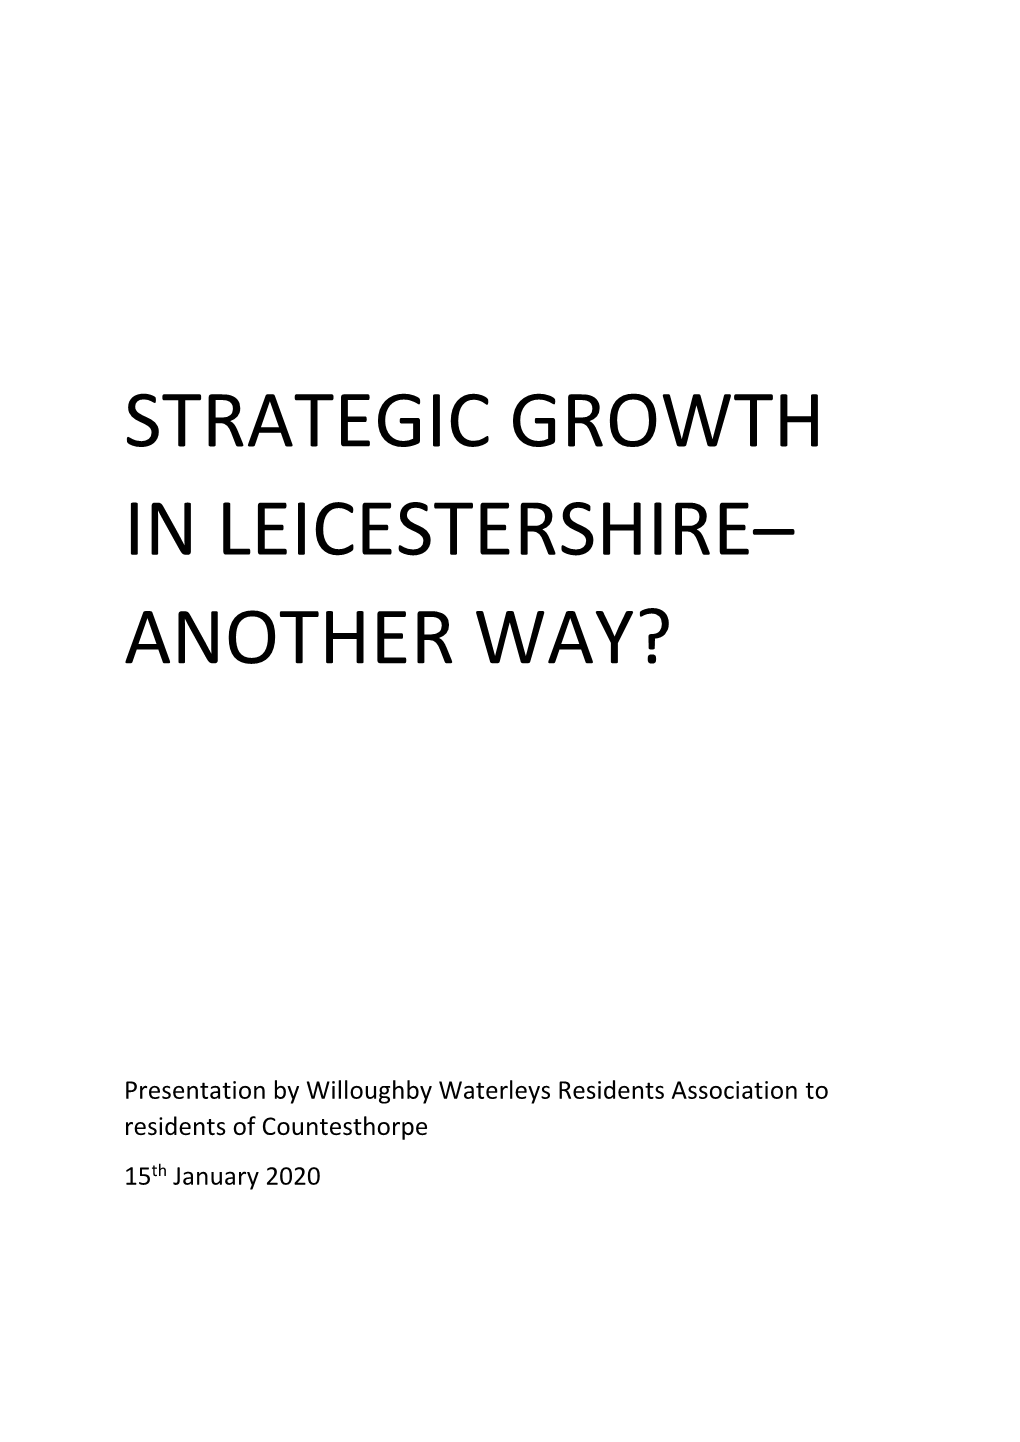 Strategic Growth in Leicestershire– Another Way?